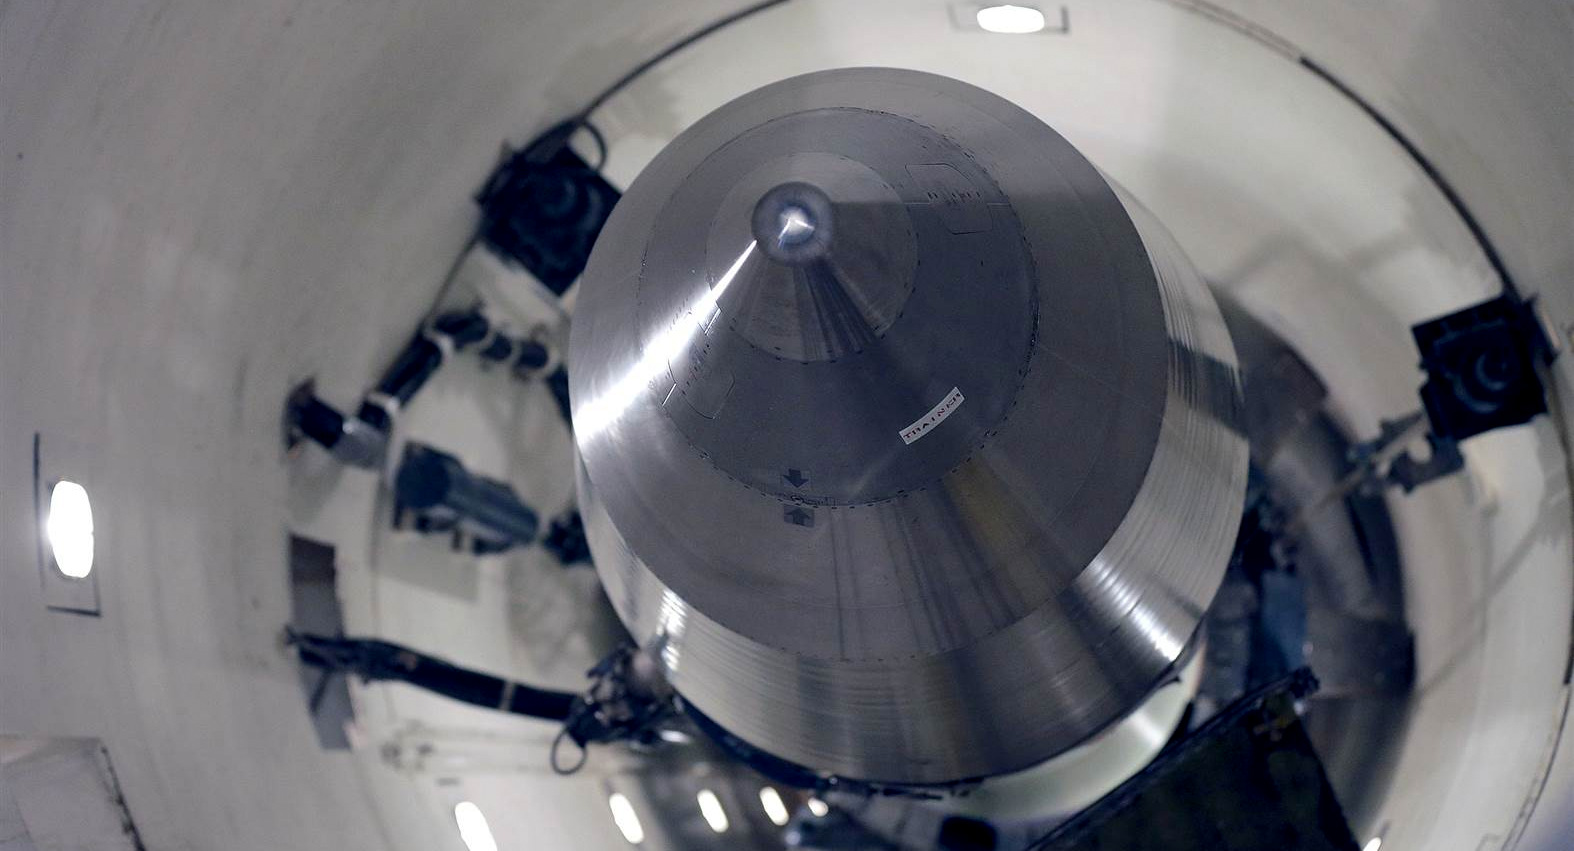 In this file photo taken June 25, 2014, an inert Minuteman 3 missile is seen in a training launch tube at Minot Air Force Base, N.D. (Charlie Riedel/AP)